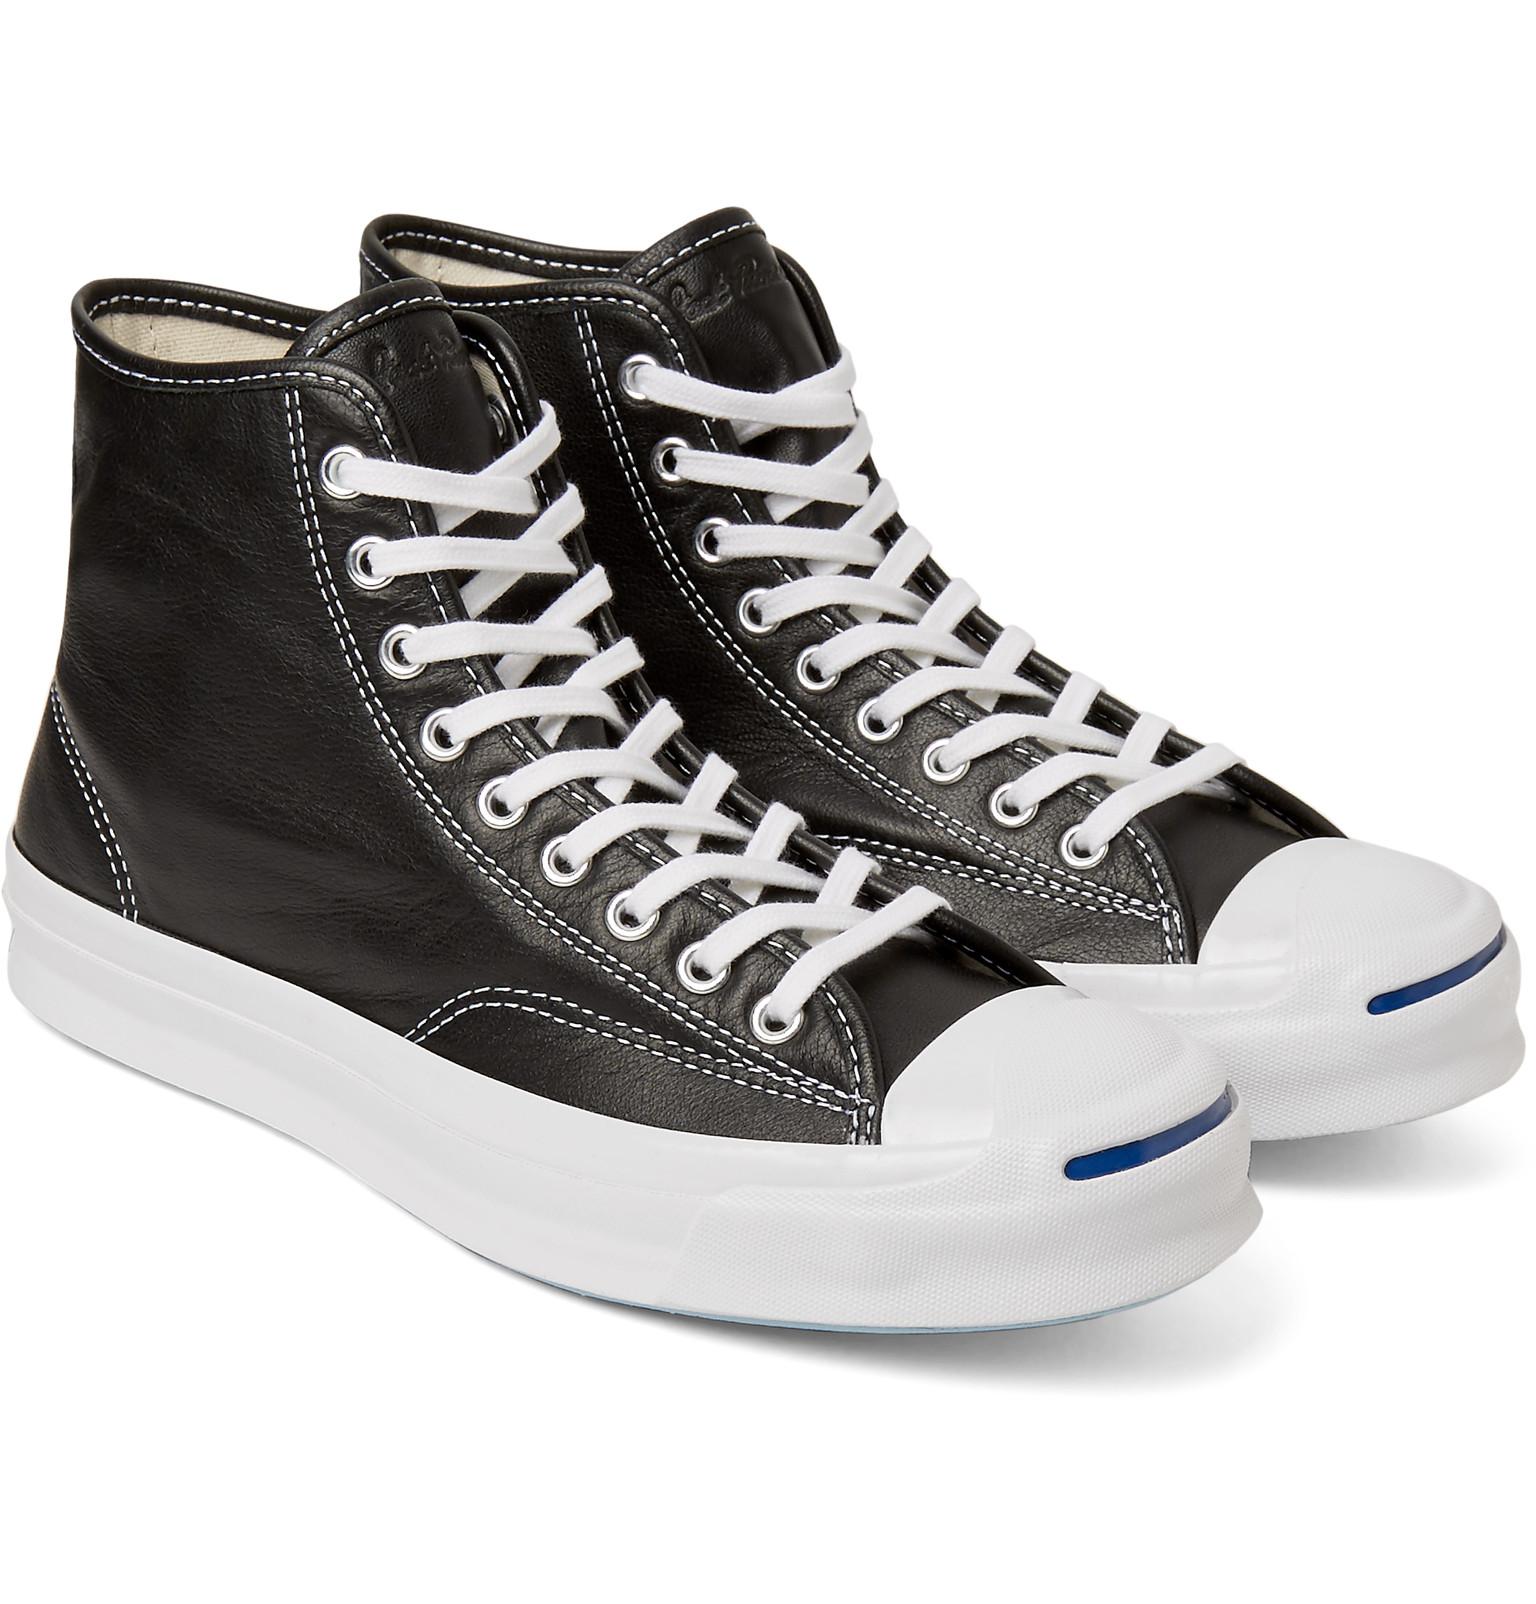 Jack Purcell Signature Leather High-top Sneakers in Black for Men - Lyst